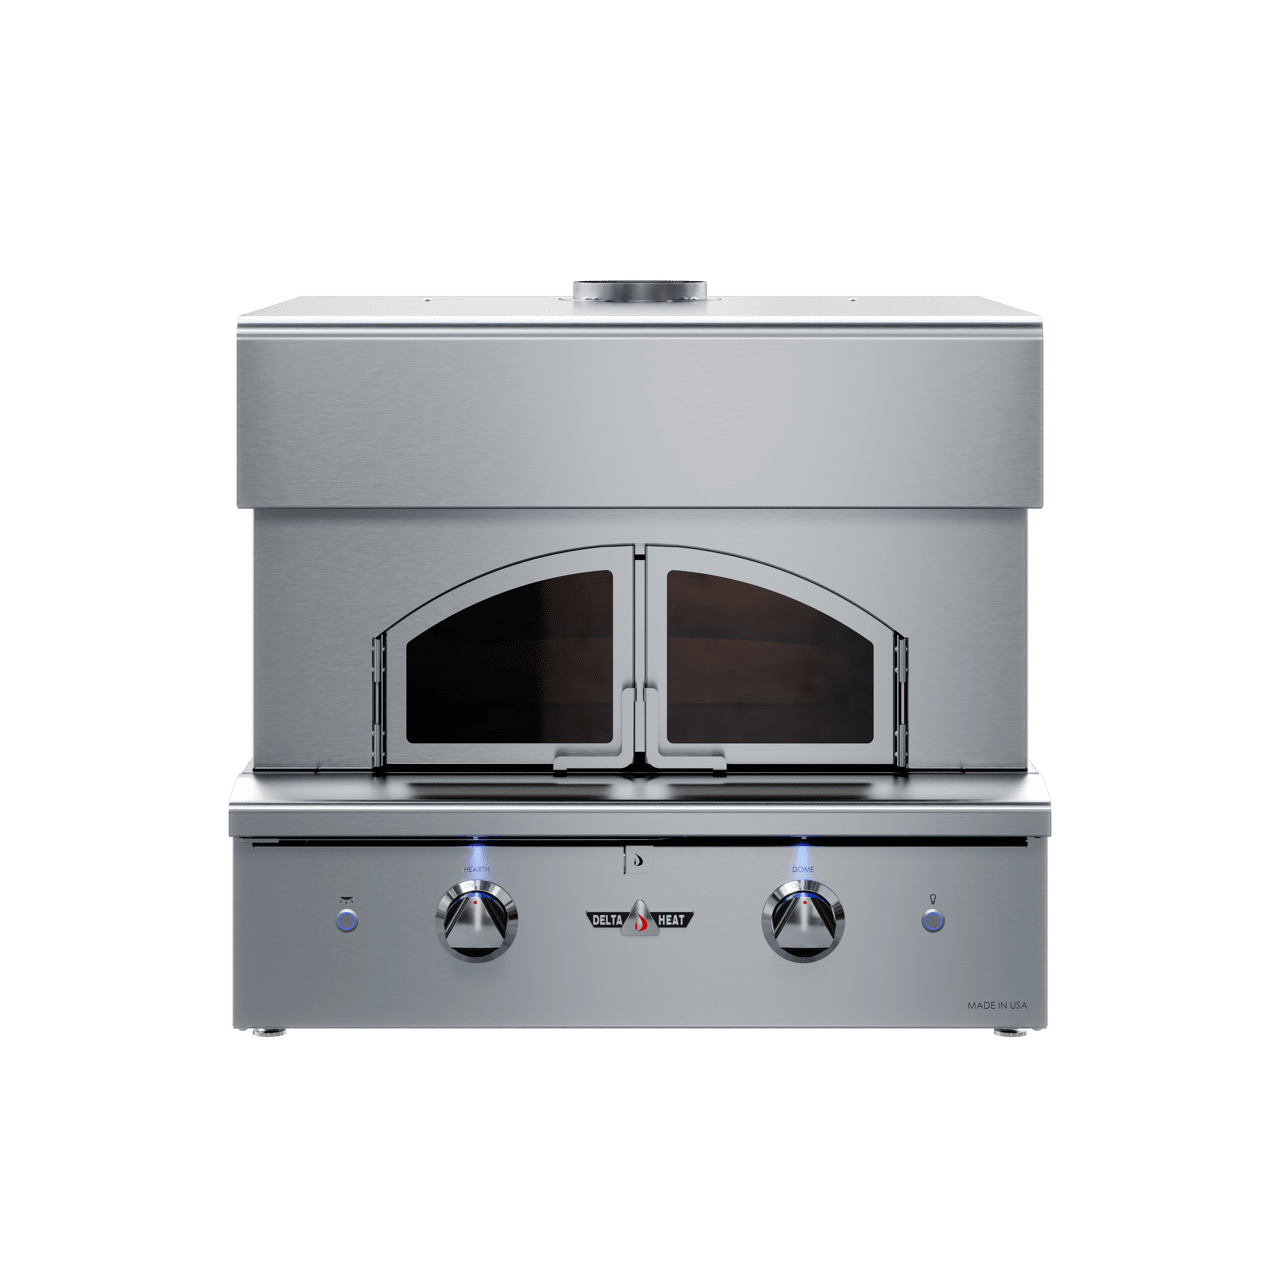 Delta Heat Built In Pizza Oven - Natural Gas